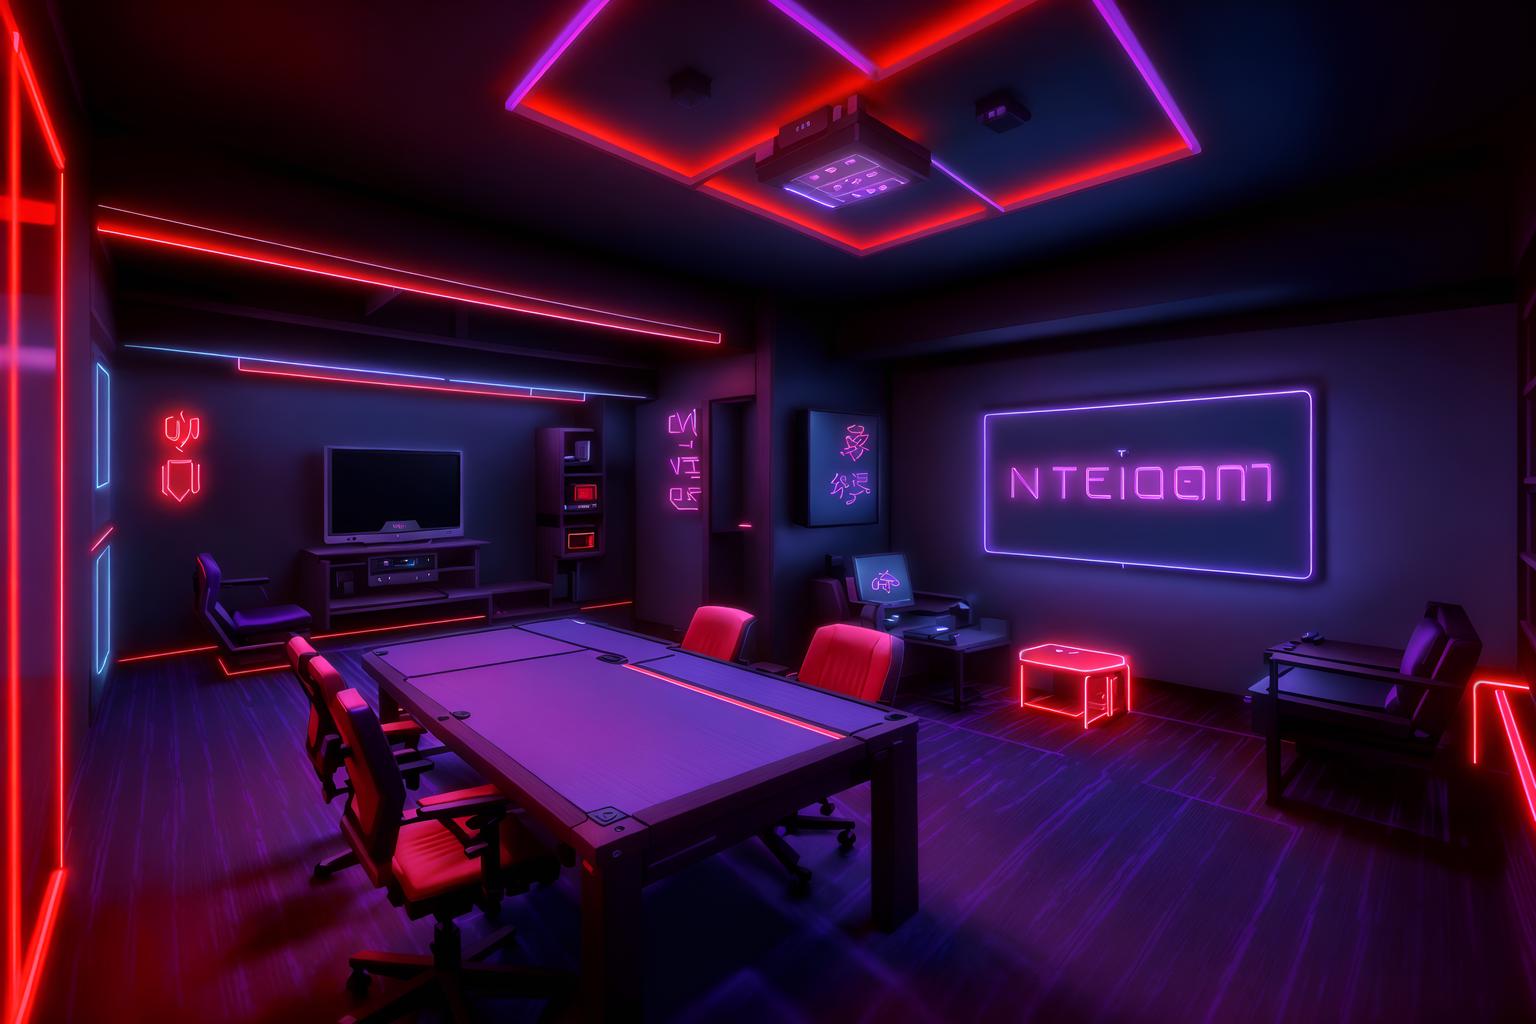 gaming room-style (onsen interior) . with purple and red lights and at night and dark room and purple, red and blue fade light and dark walls and neon letters on wall and neon lights and computer desk with computer displays and keyboard. . cinematic photo, highly detailed, cinematic lighting, ultra-detailed, ultrarealistic, photorealism, 8k. gaming room interior design style. masterpiece, cinematic light, ultrarealistic+, photorealistic+, 8k, raw photo, realistic, sharp focus on eyes, (symmetrical eyes), (intact eyes), hyperrealistic, highest quality, best quality, , highly detailed, masterpiece, best quality, extremely detailed 8k wallpaper, masterpiece, best quality, ultra-detailed, best shadow, detailed background, detailed face, detailed eyes, high contrast, best illumination, detailed face, dulux, caustic, dynamic angle, detailed glow. dramatic lighting. highly detailed, insanely detailed hair, symmetrical, intricate details, professionally retouched, 8k high definition. strong bokeh. award winning photo.